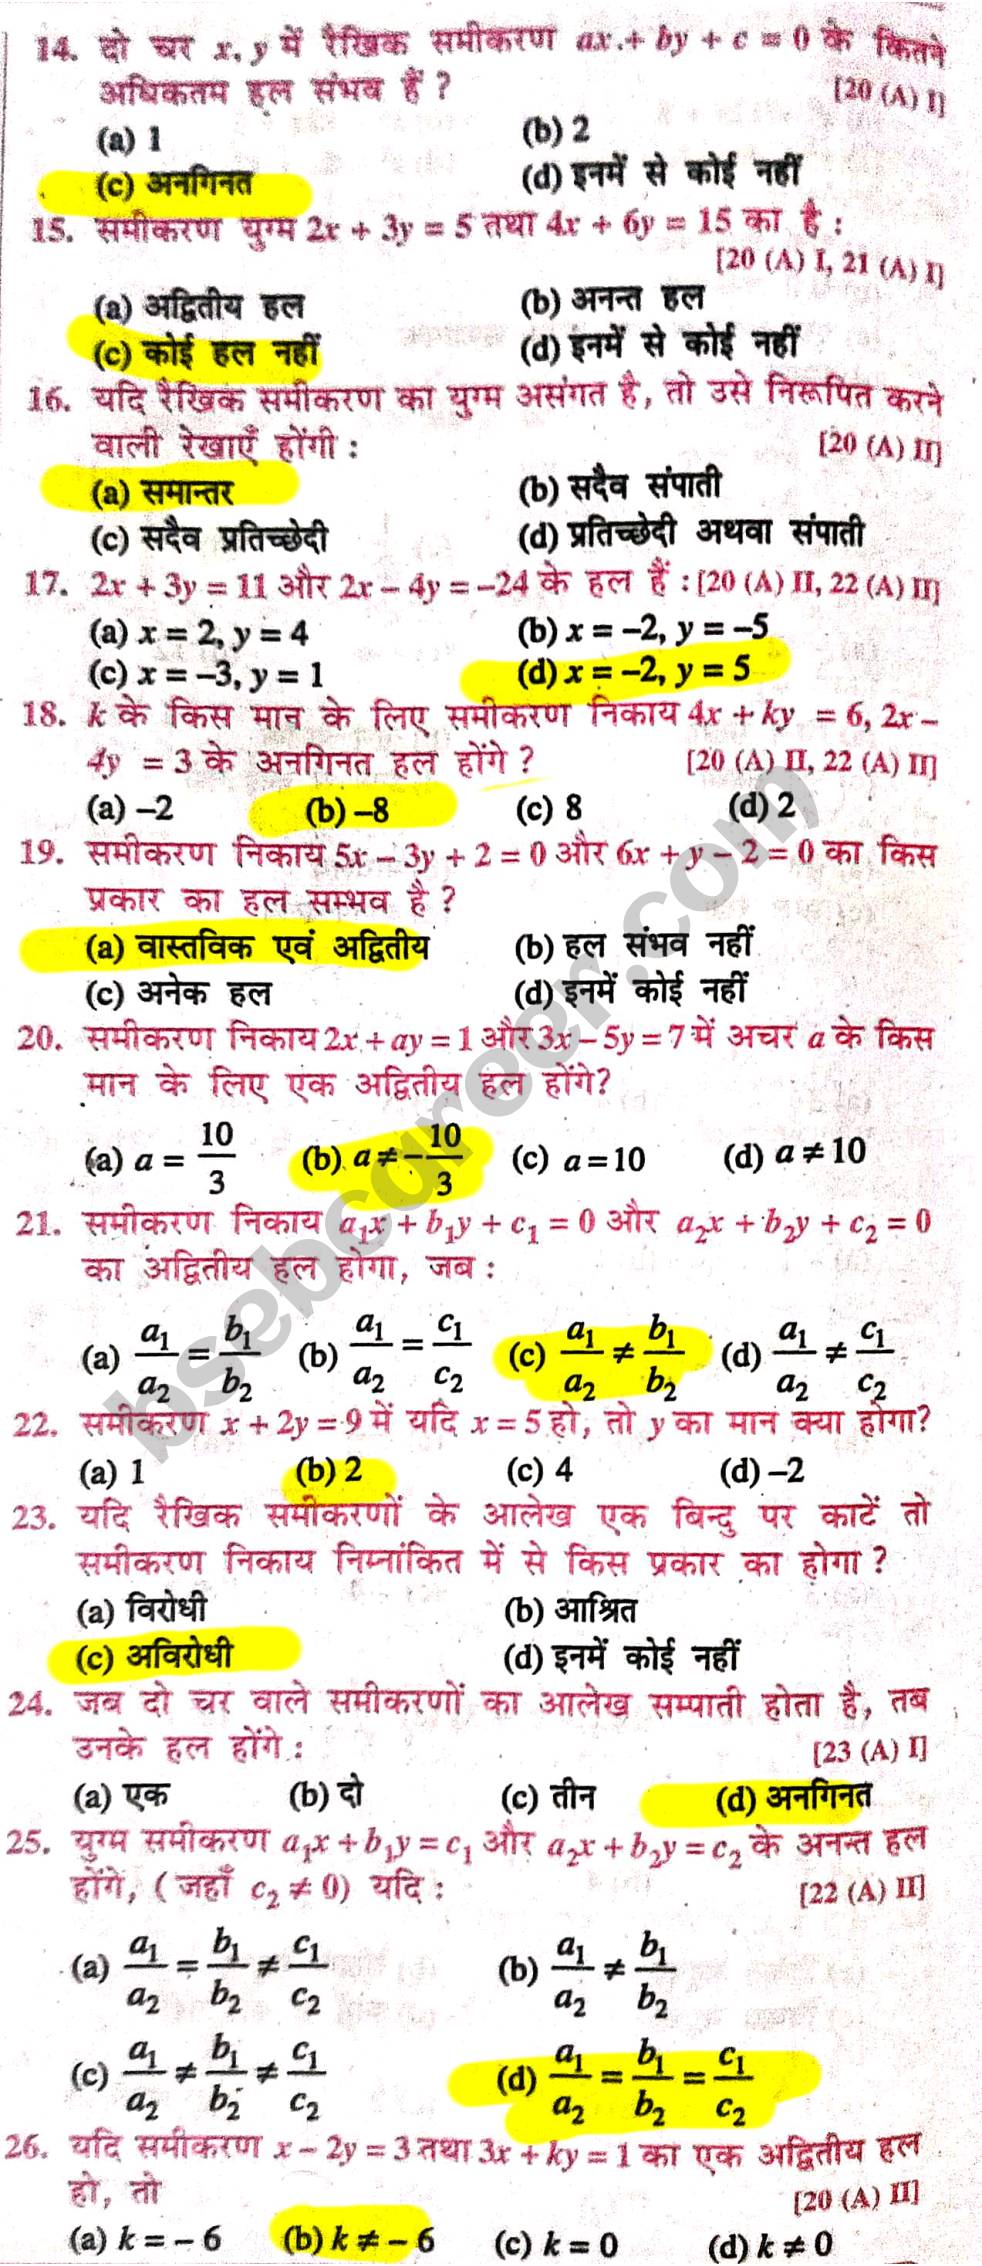 Class 10th Maths Chapter 3 MCQ In Hindi